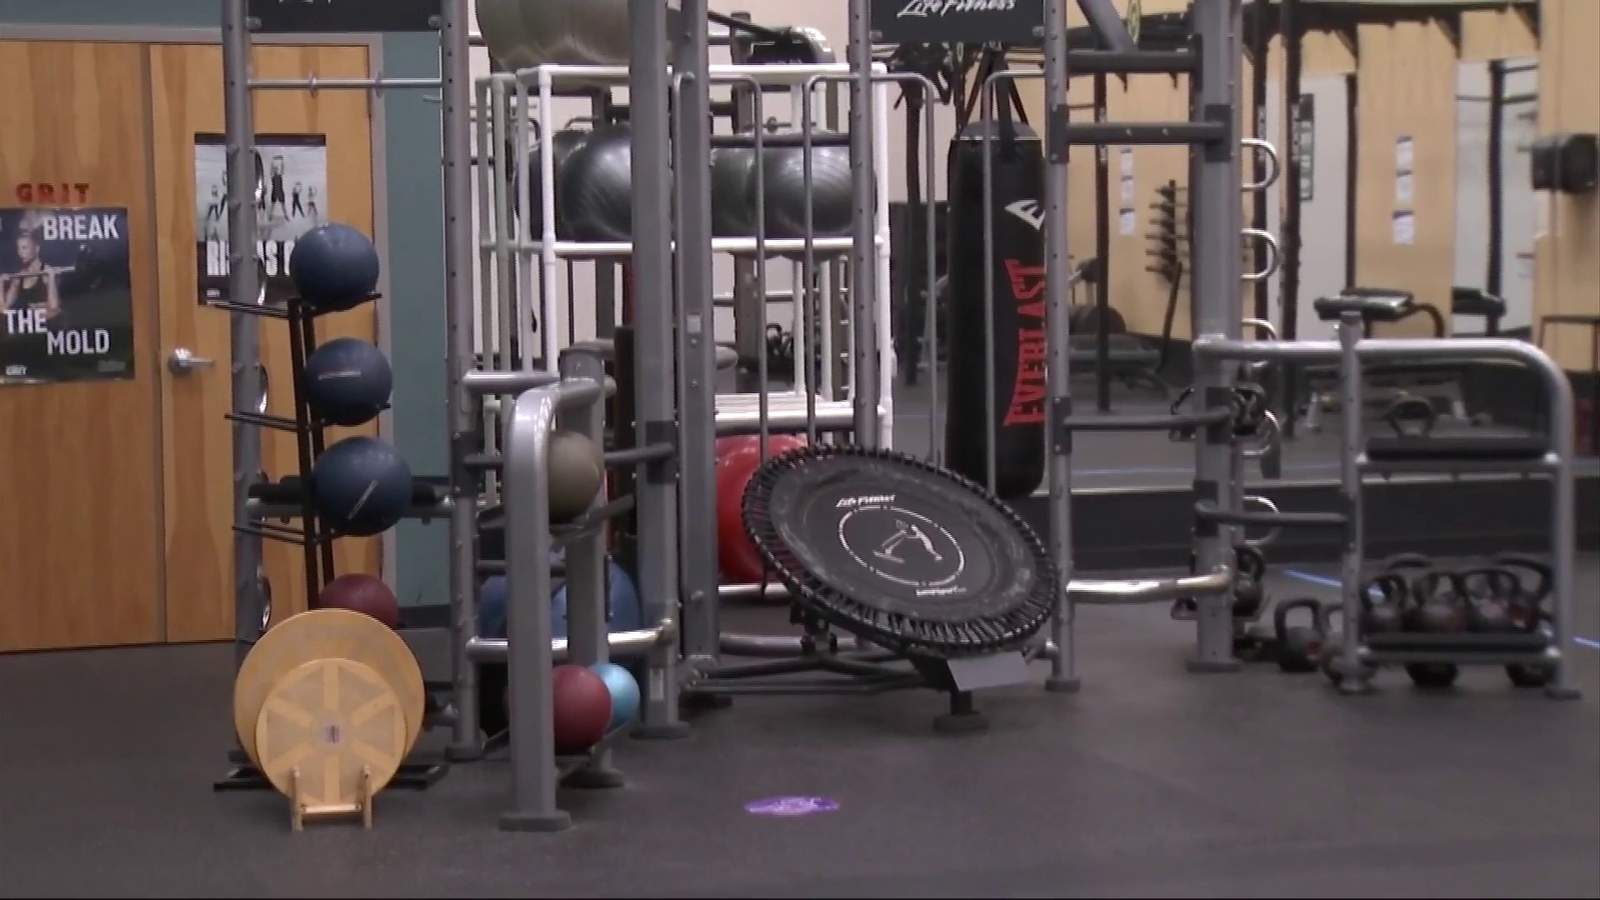 Carilion Wellness, other local gyms roll out plans for reopening